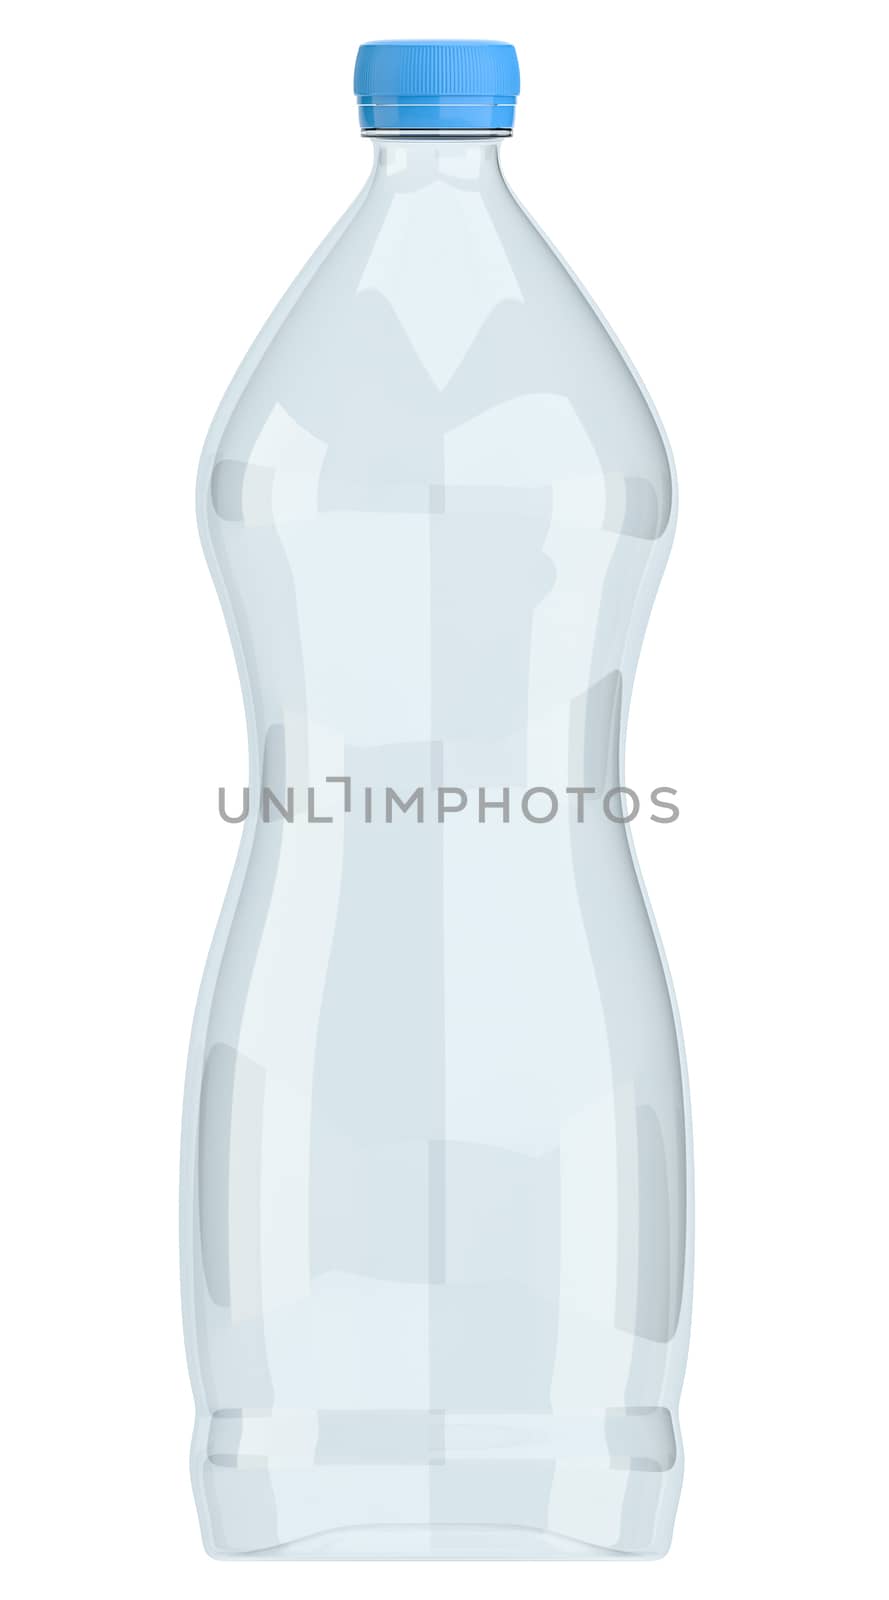 Plastic bottle of water. Product Packing. 3d illustration